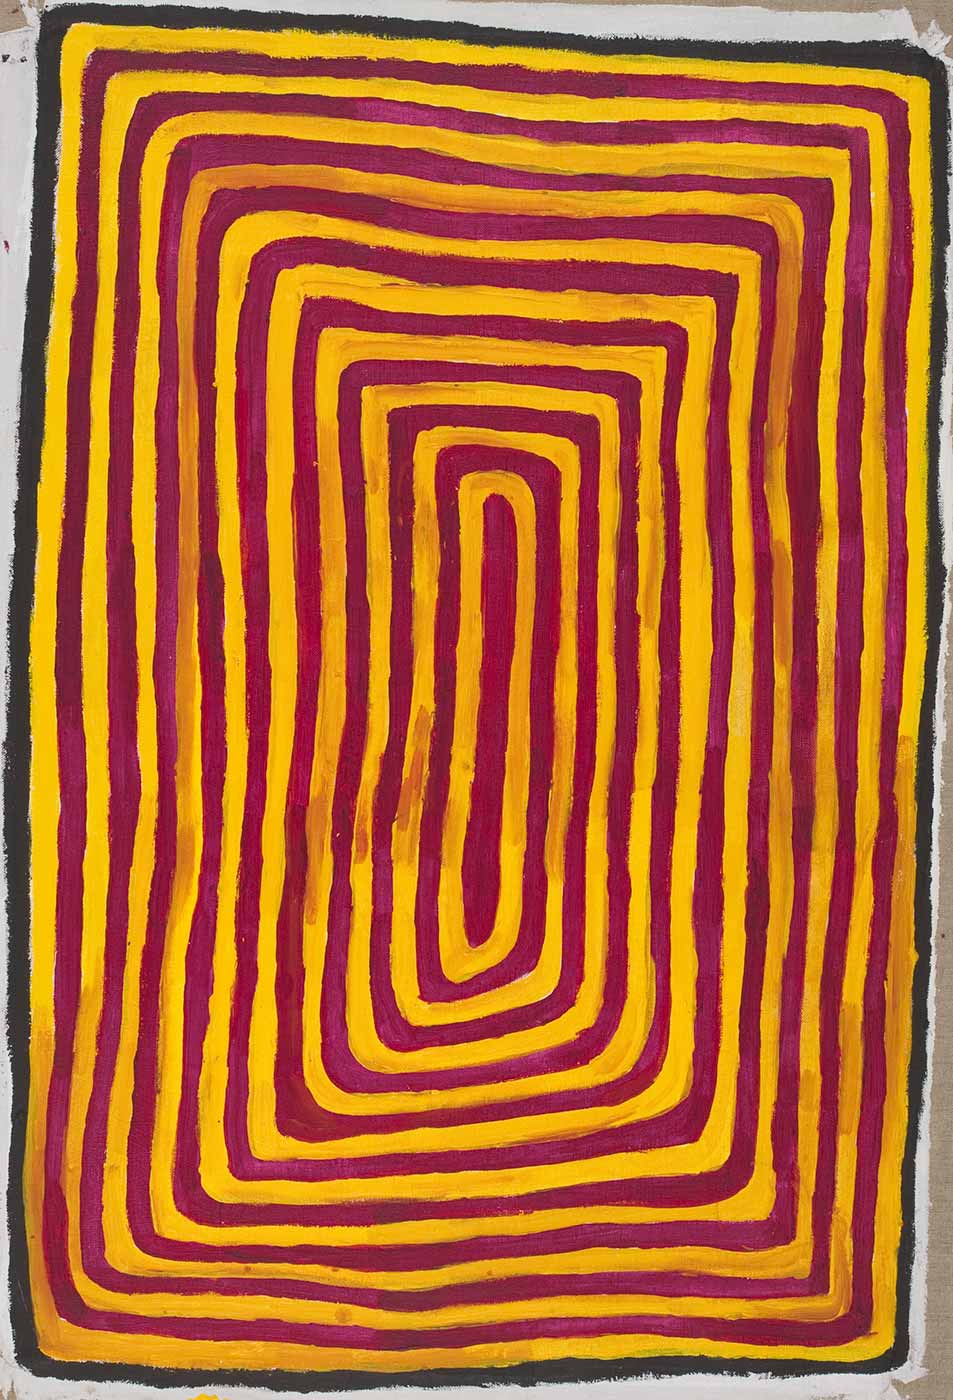 A painting on brown linen of concentric rectangles in yellow and red with a black and white border. - click to view larger image